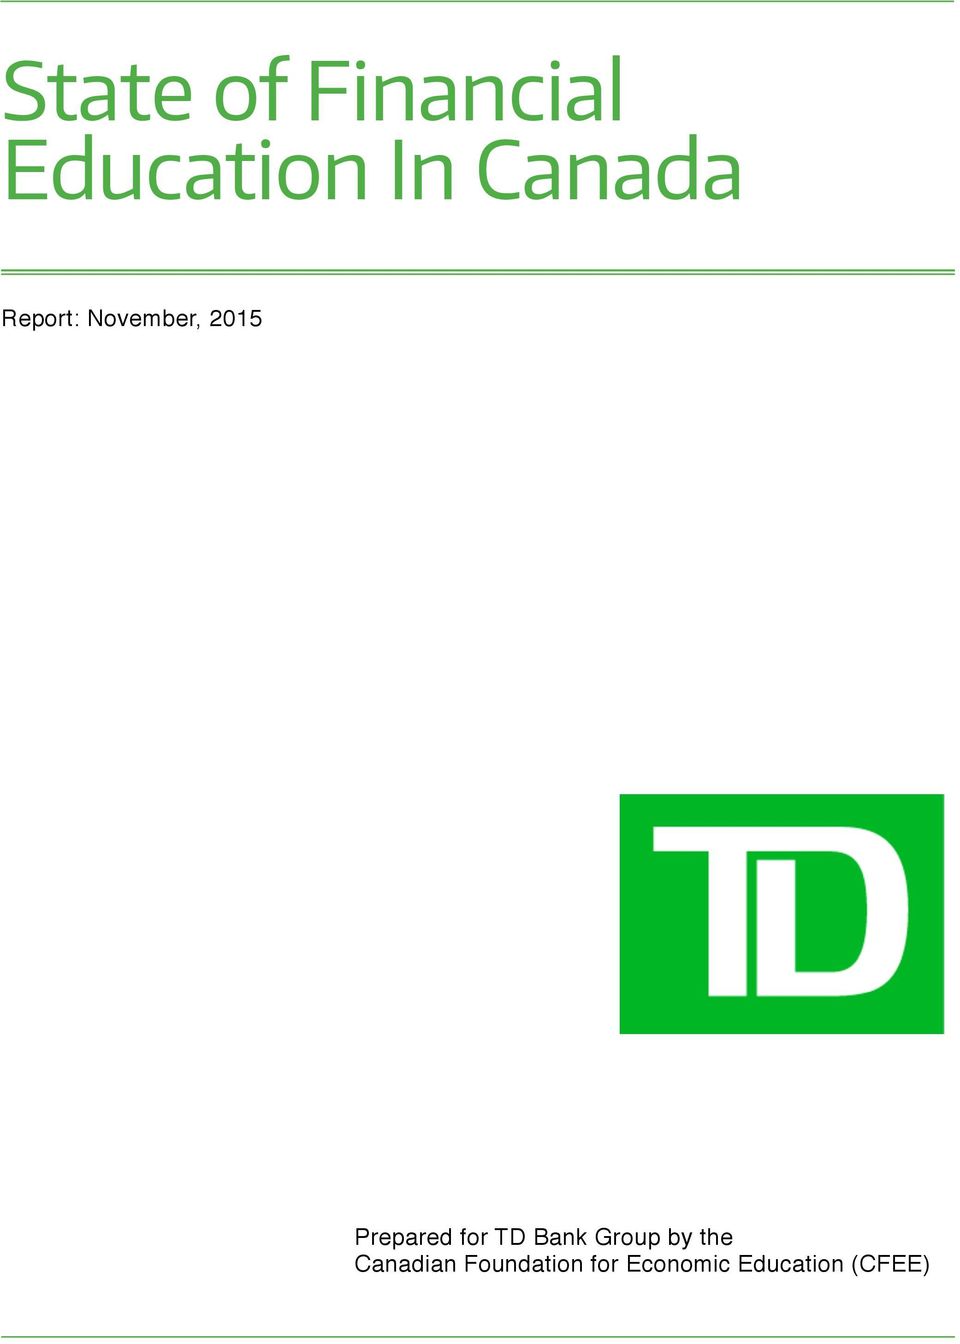 Prepared for TD Bank Group by the